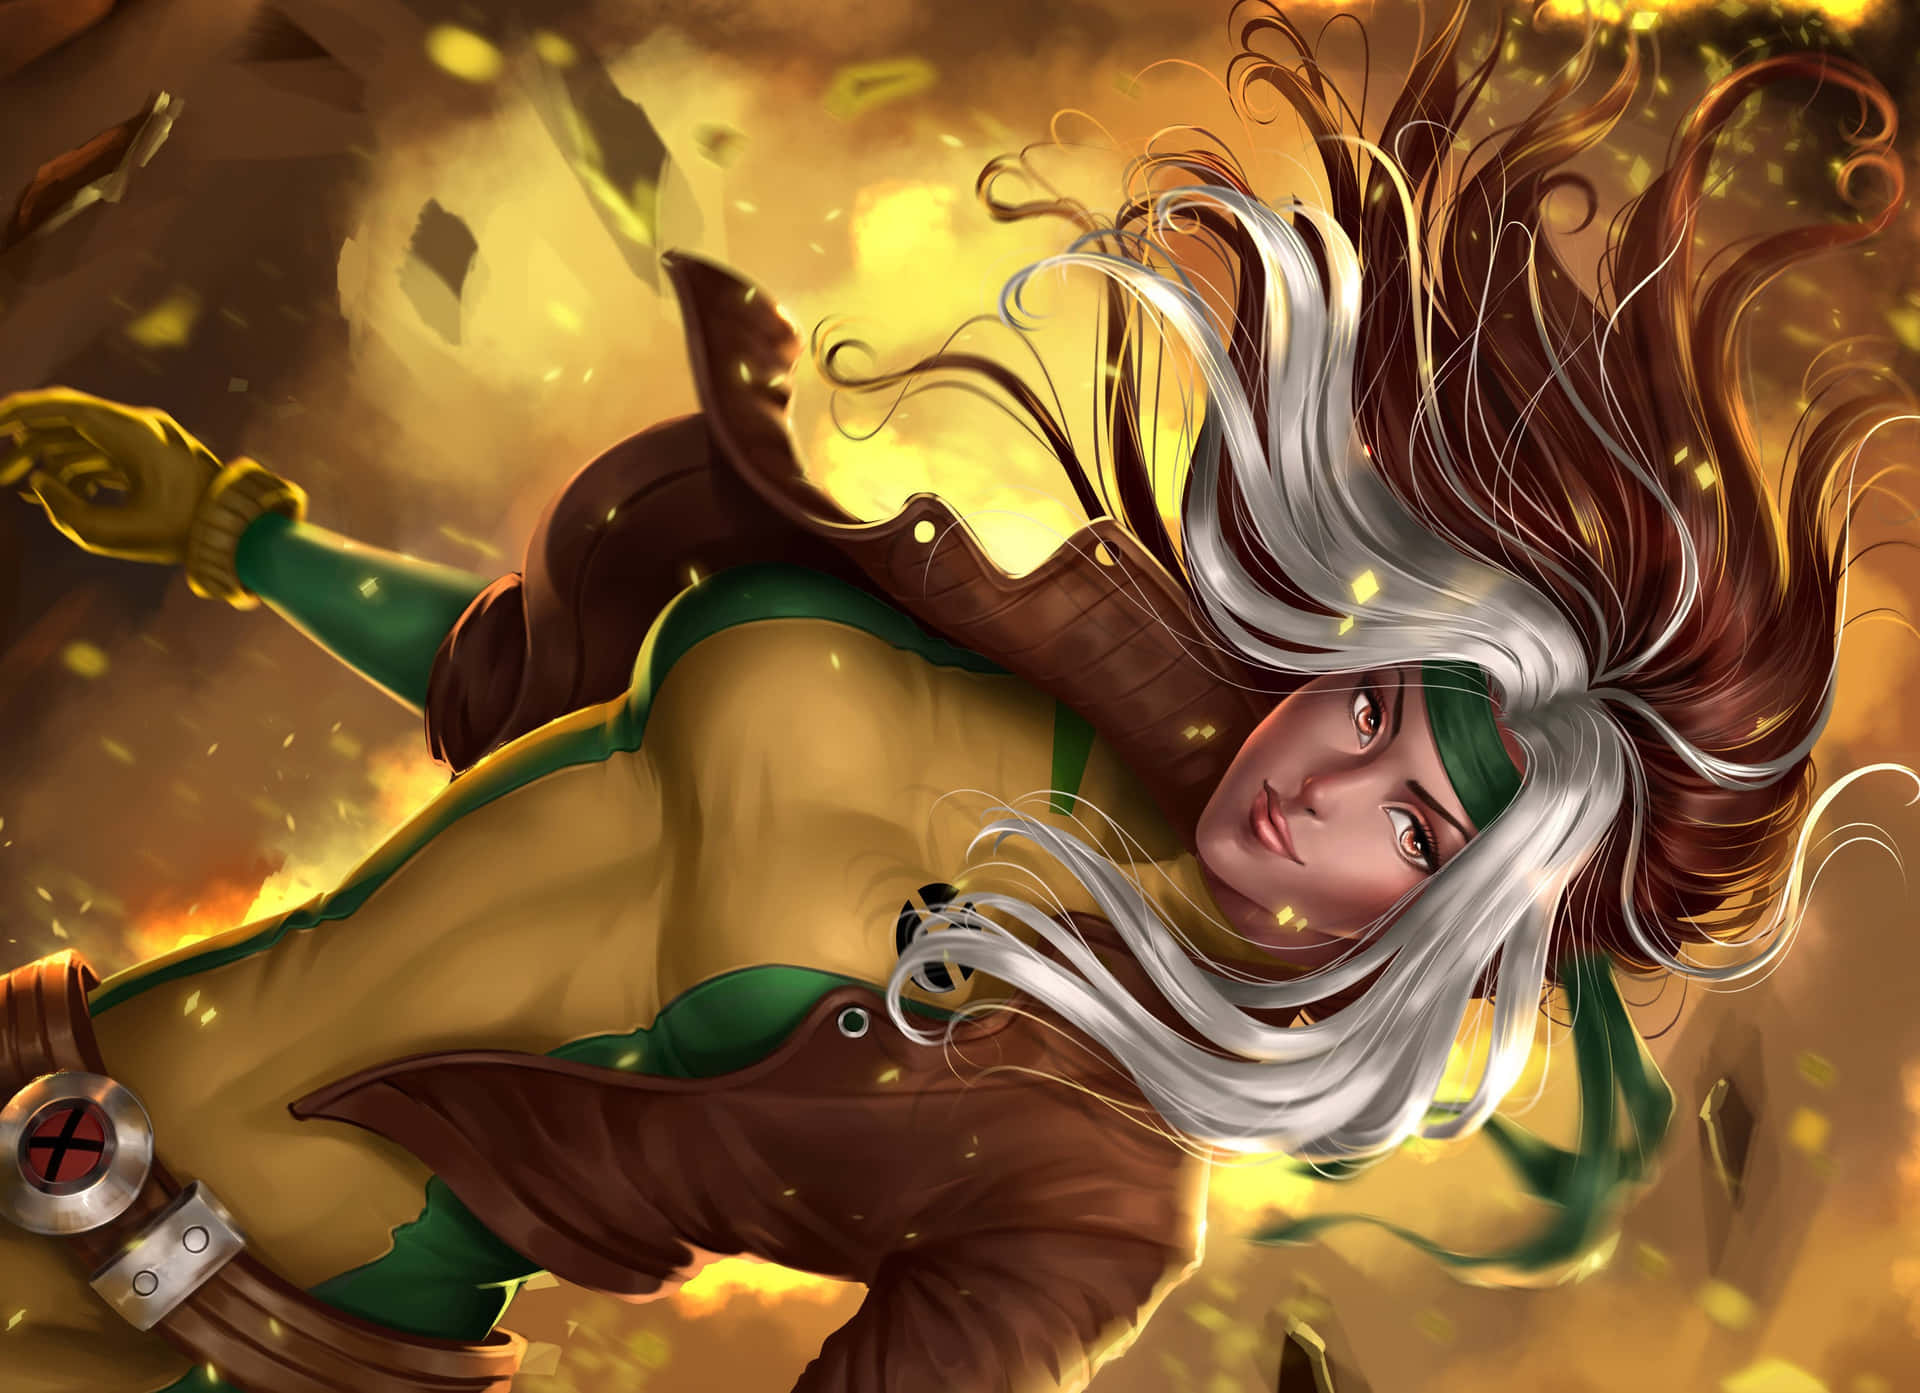 A Female Comic Character With Long Hair And Green Eyes Background